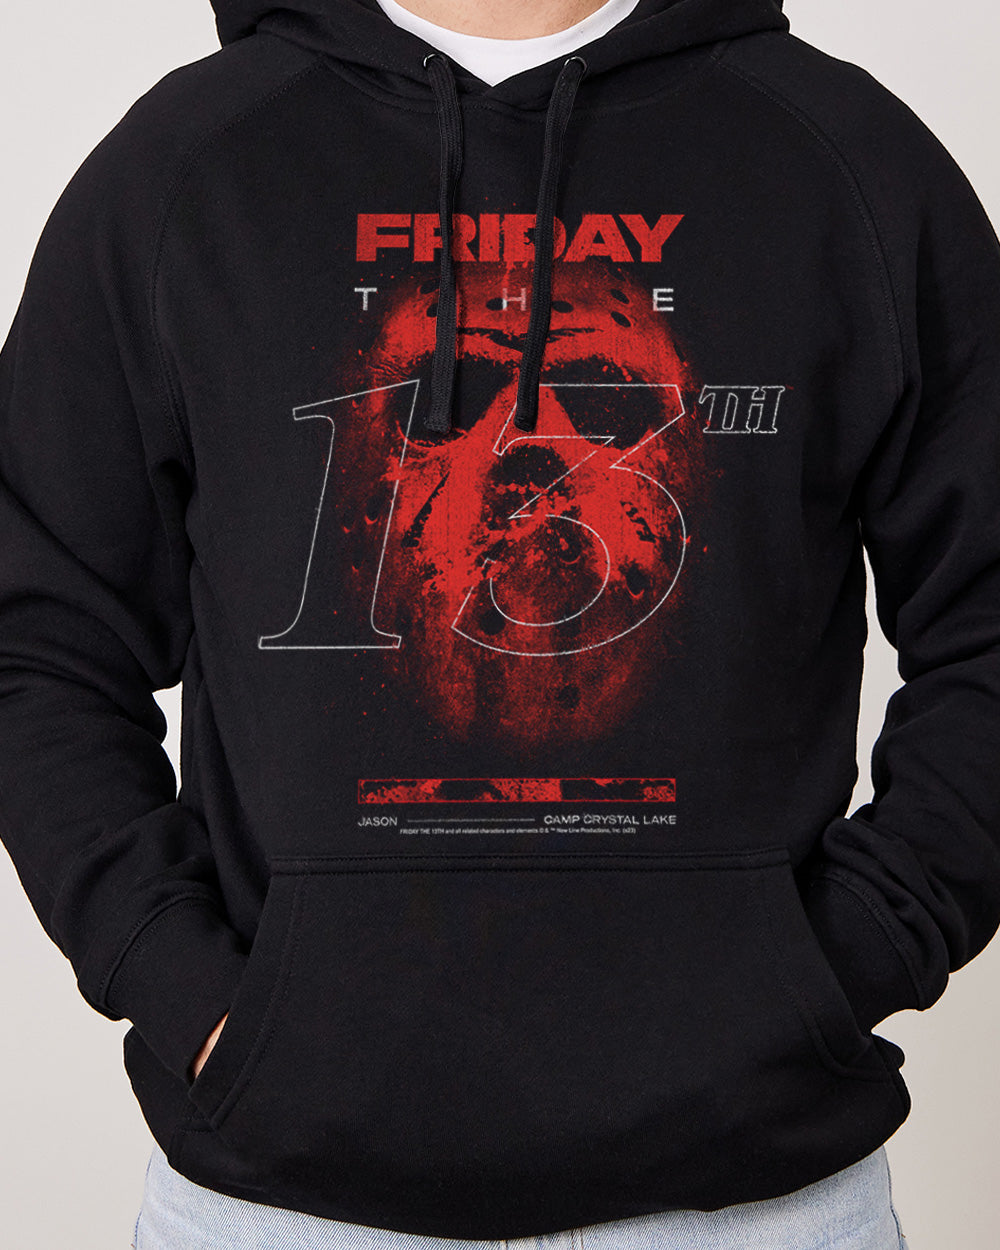 Friday the 13th Mask Hoodie Europe Online Black